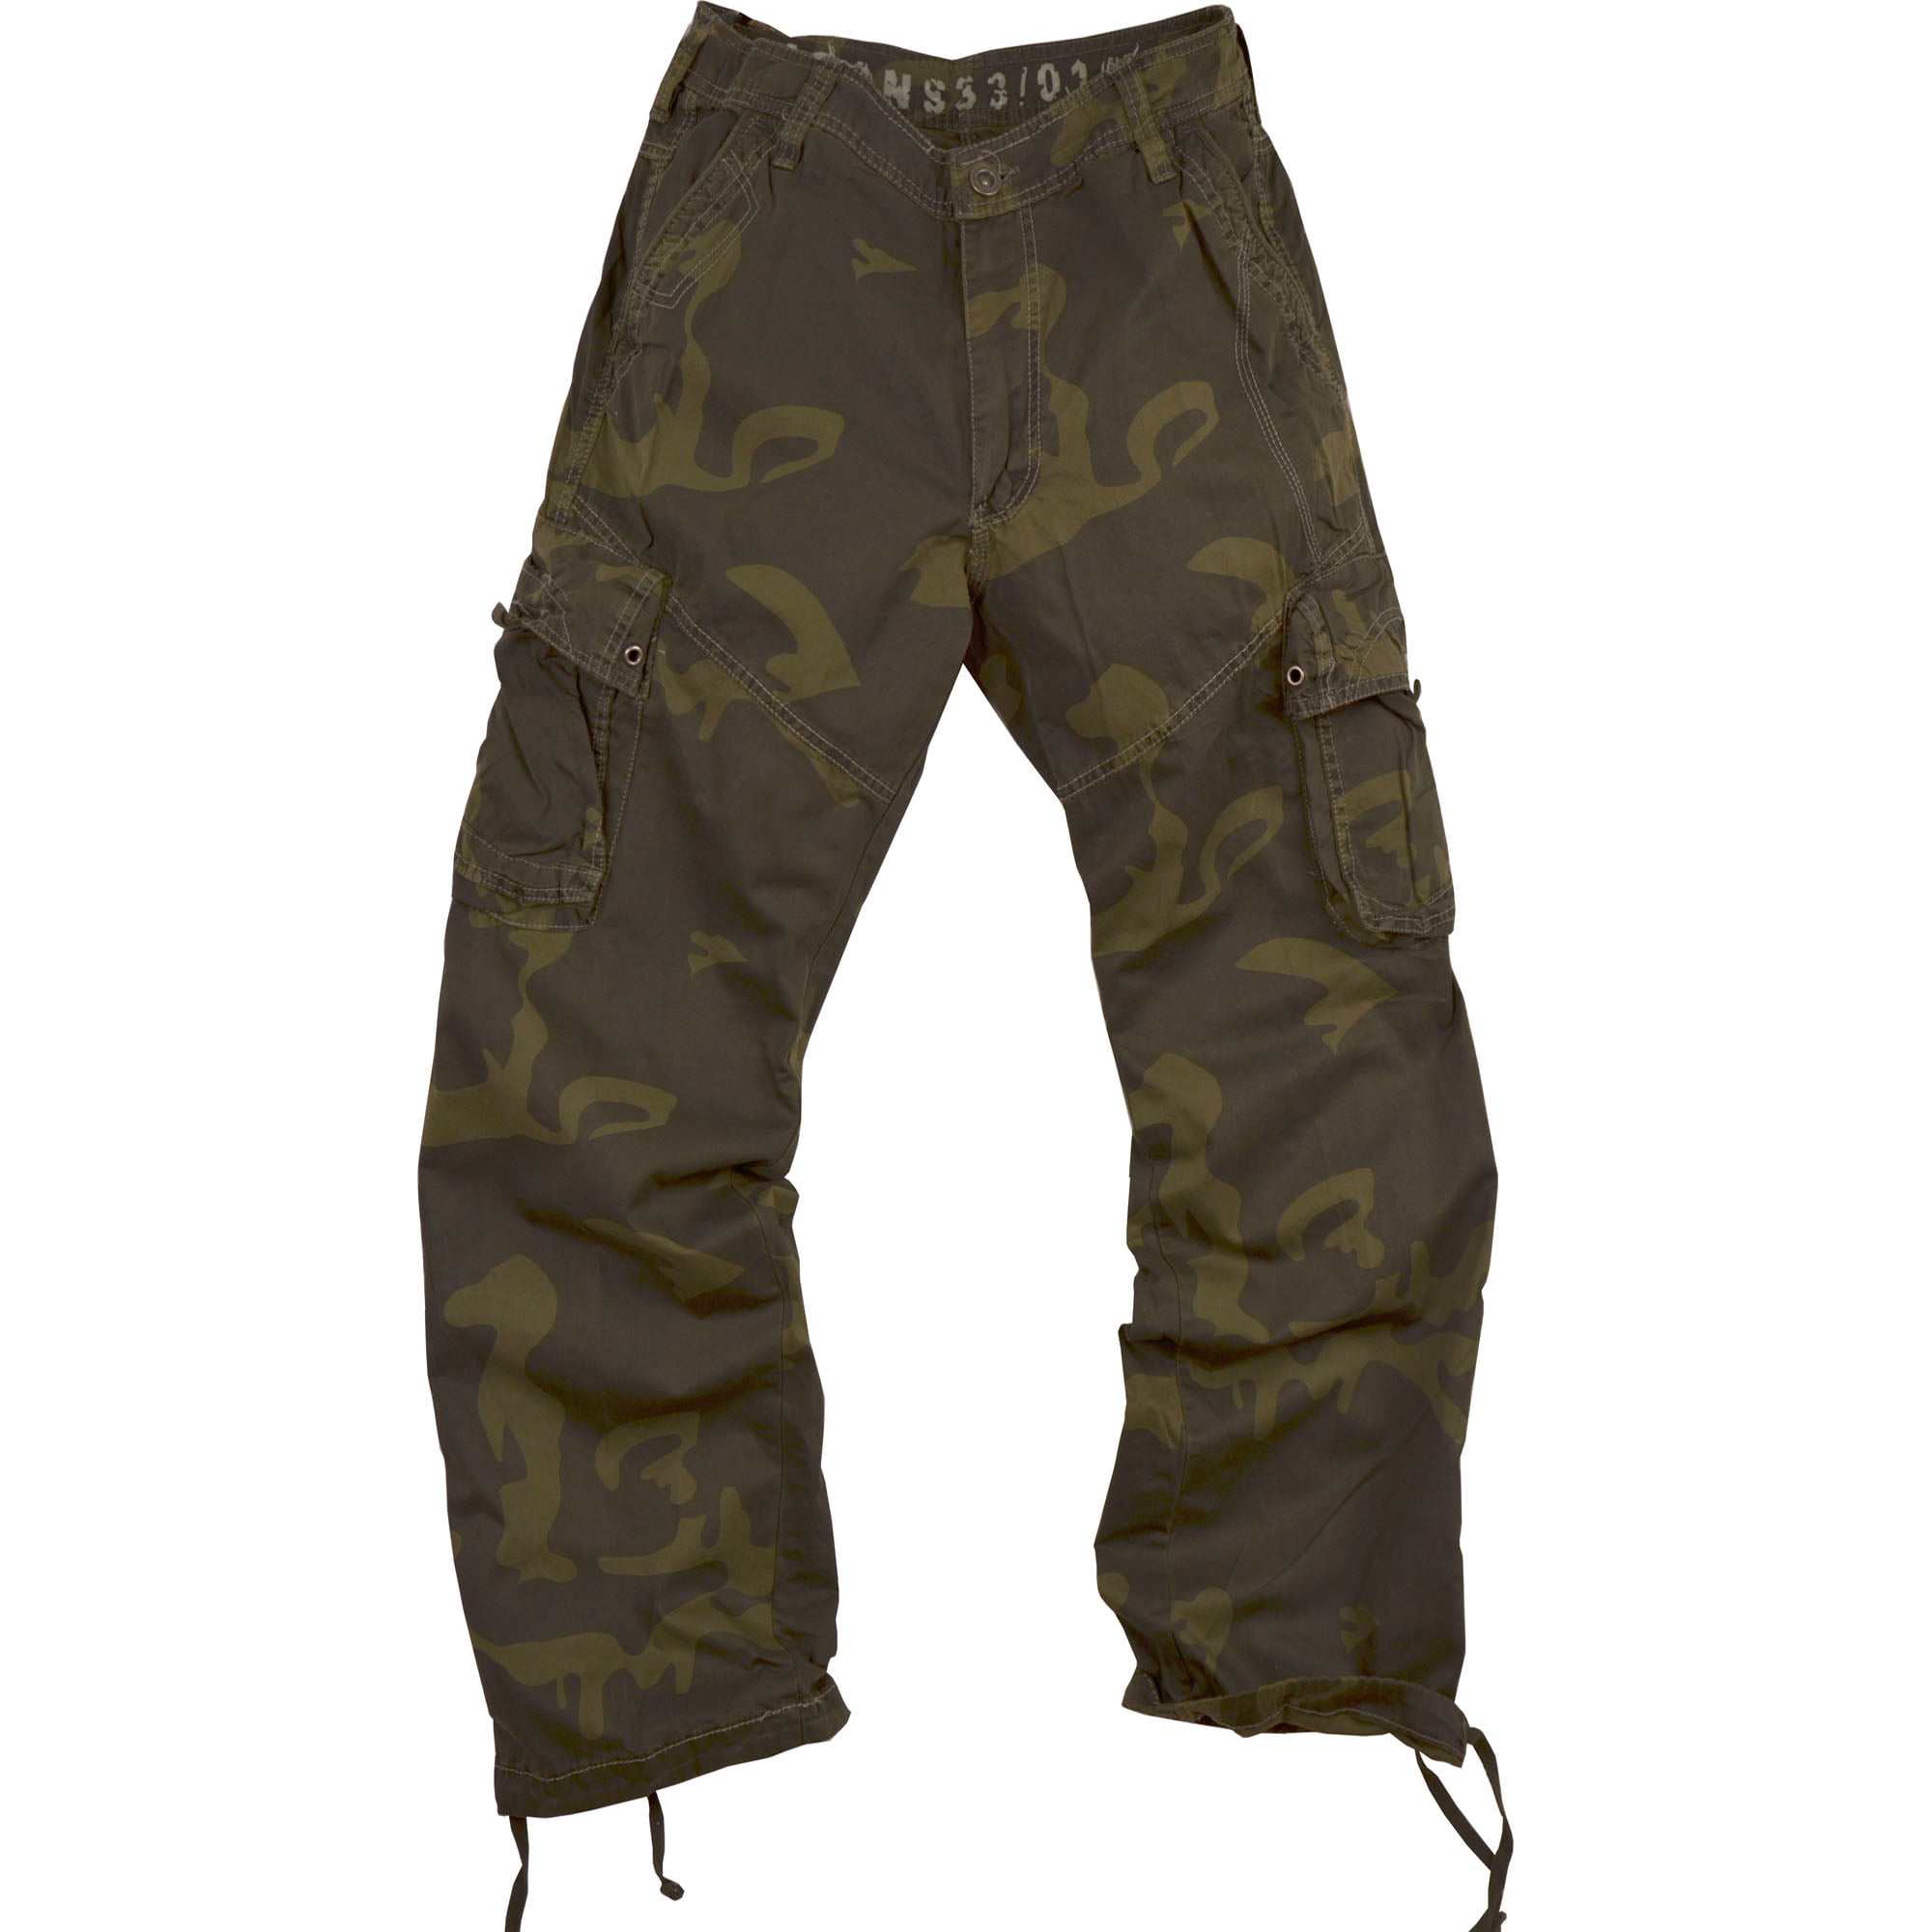 StoneTouch Men's Military-Style Cargo Camo Olive Color Pants 28C1-38x32 ...